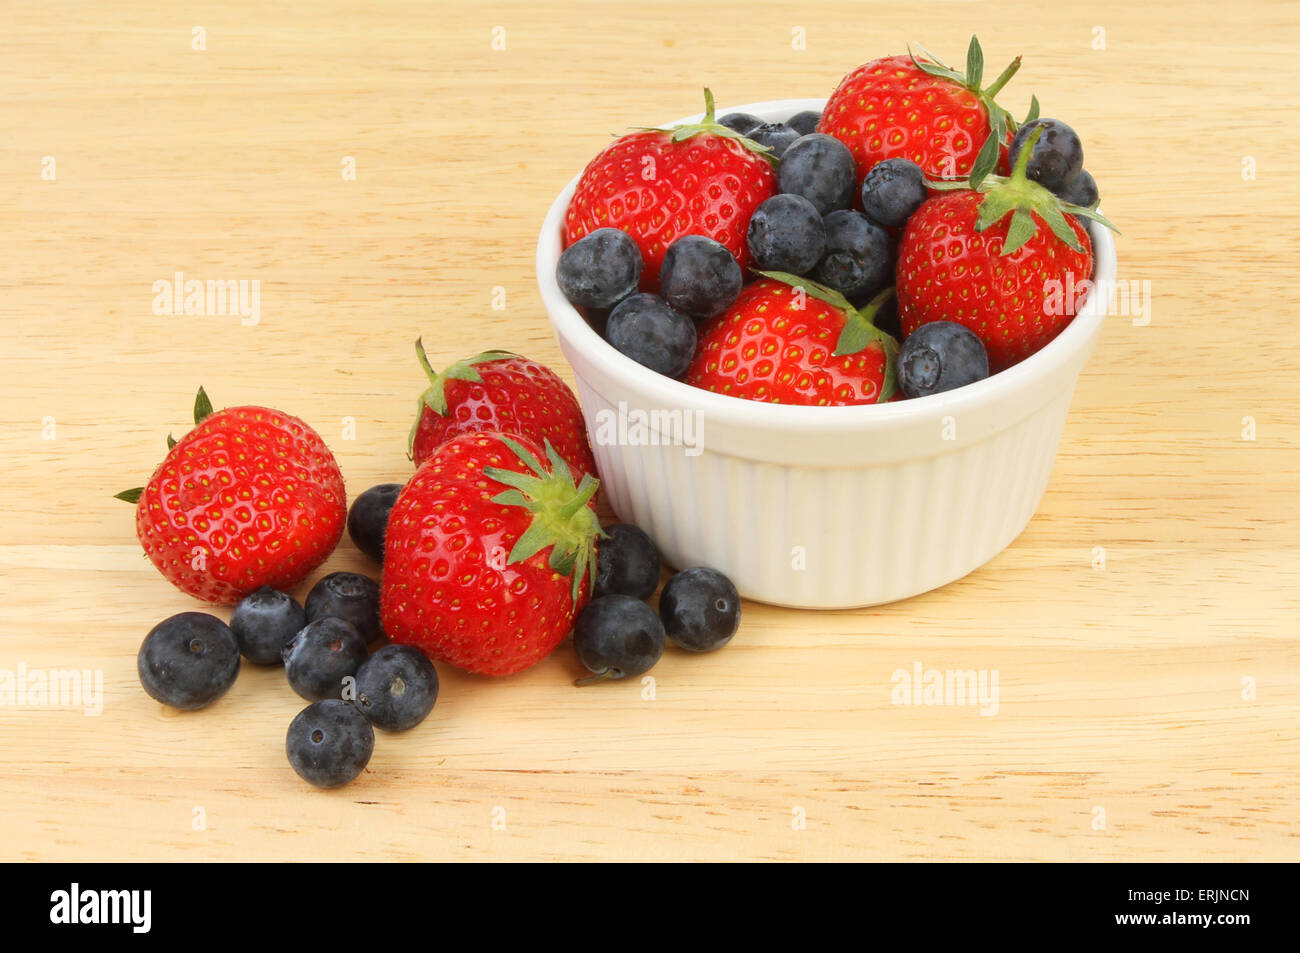 Strawberries and blueberries in and around a ramekin on a wooden board Stock Photo